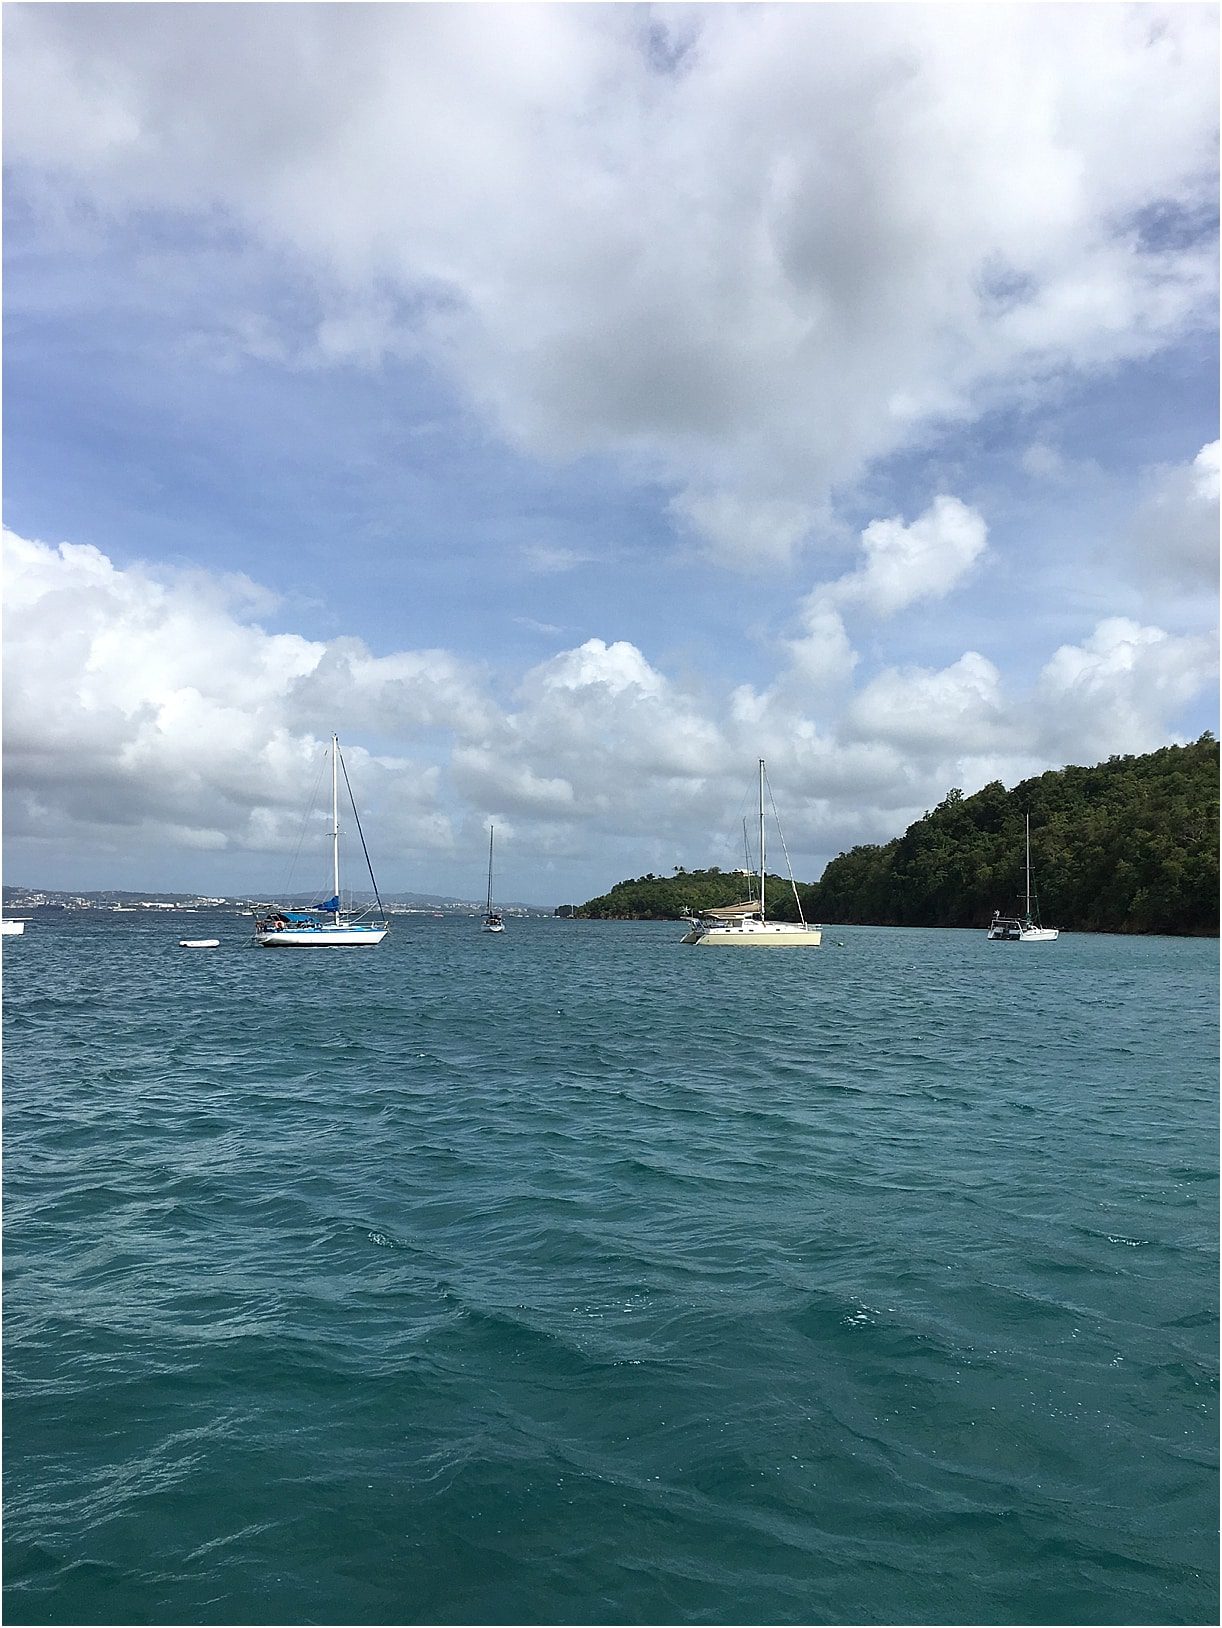 Traveling the French Caribbean Islands - Windstar Cruise - Martinique | Hill City Bride Wedding Travel Blog Virginia